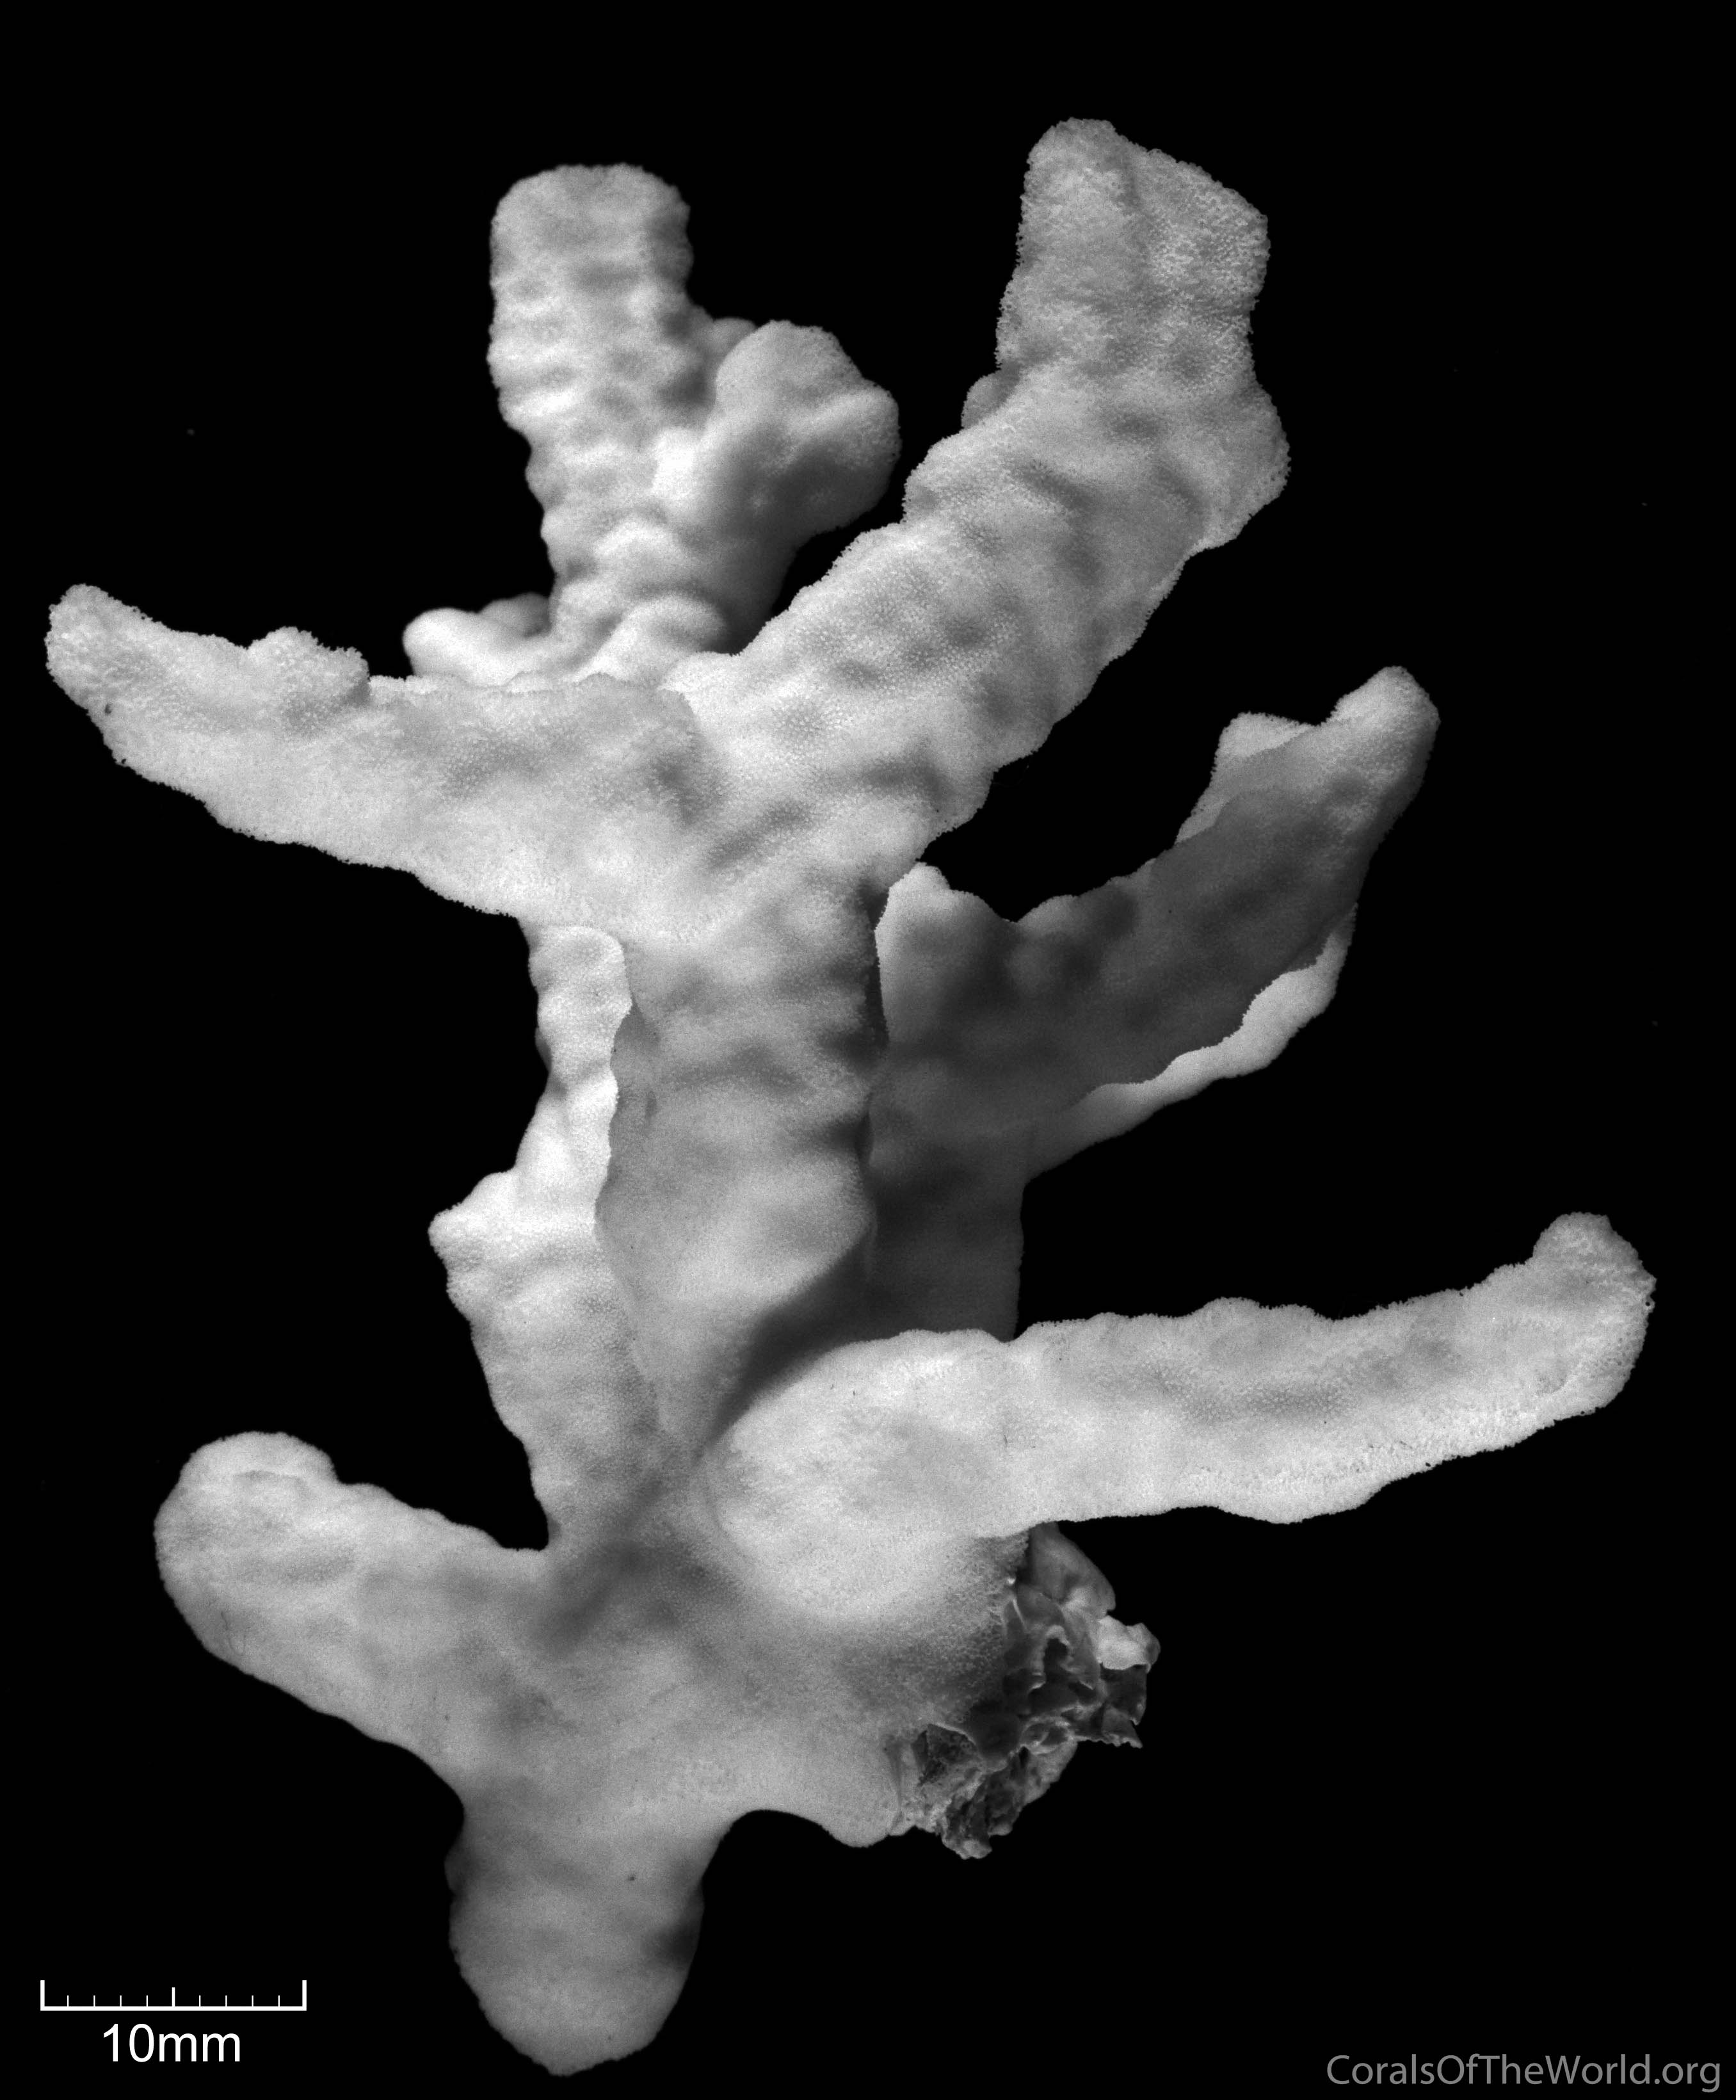 http://www.coralsoftheworld.org/media/images/0478_BW02_01.jpg